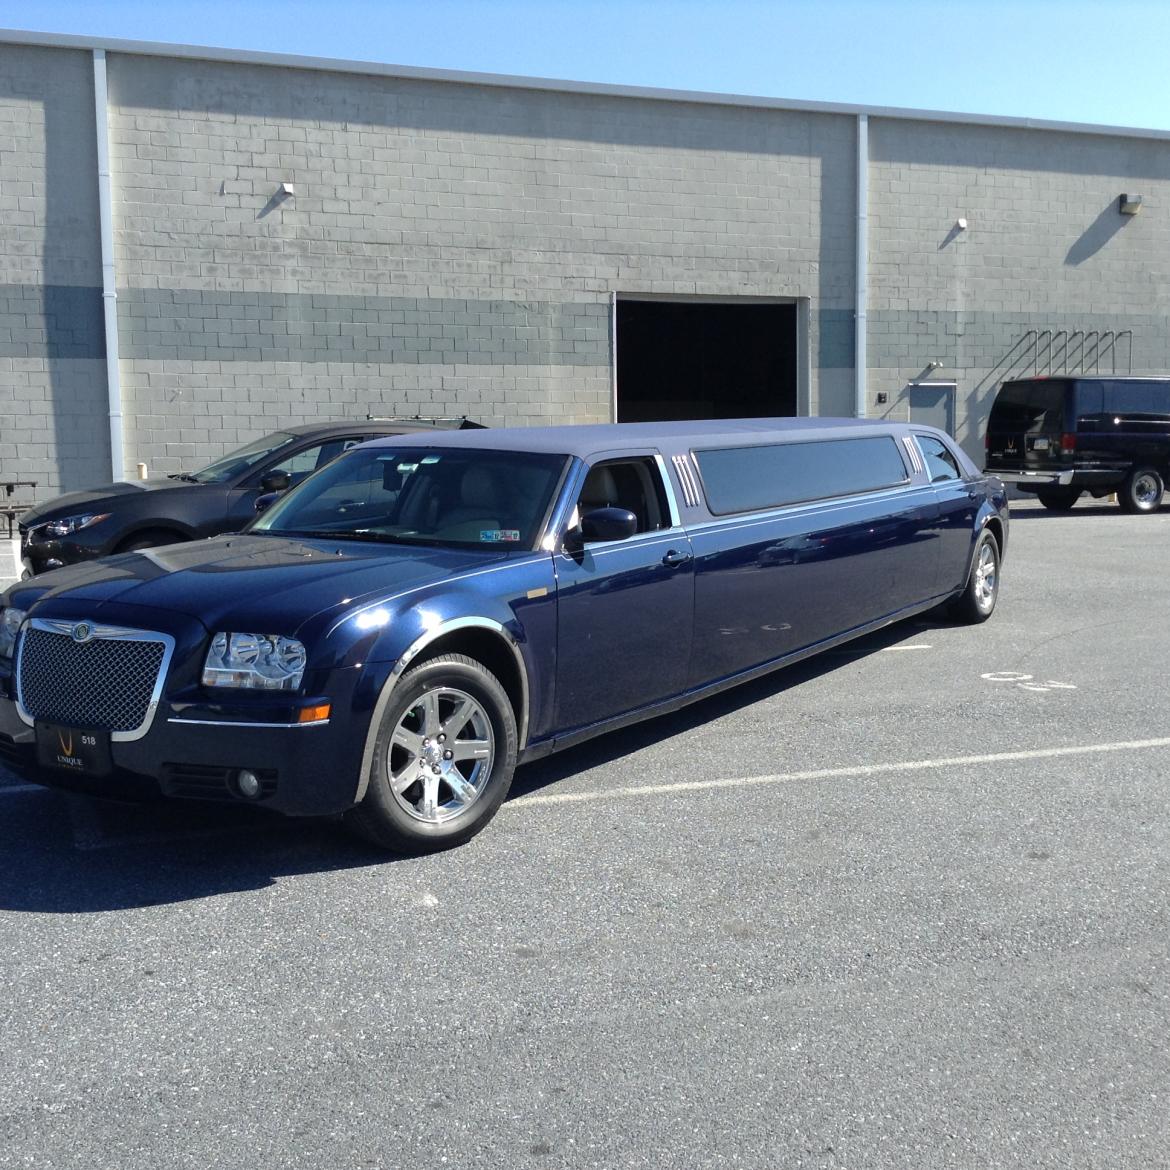 Limousine for sale: 2006 Chrysler 300 by Springfield